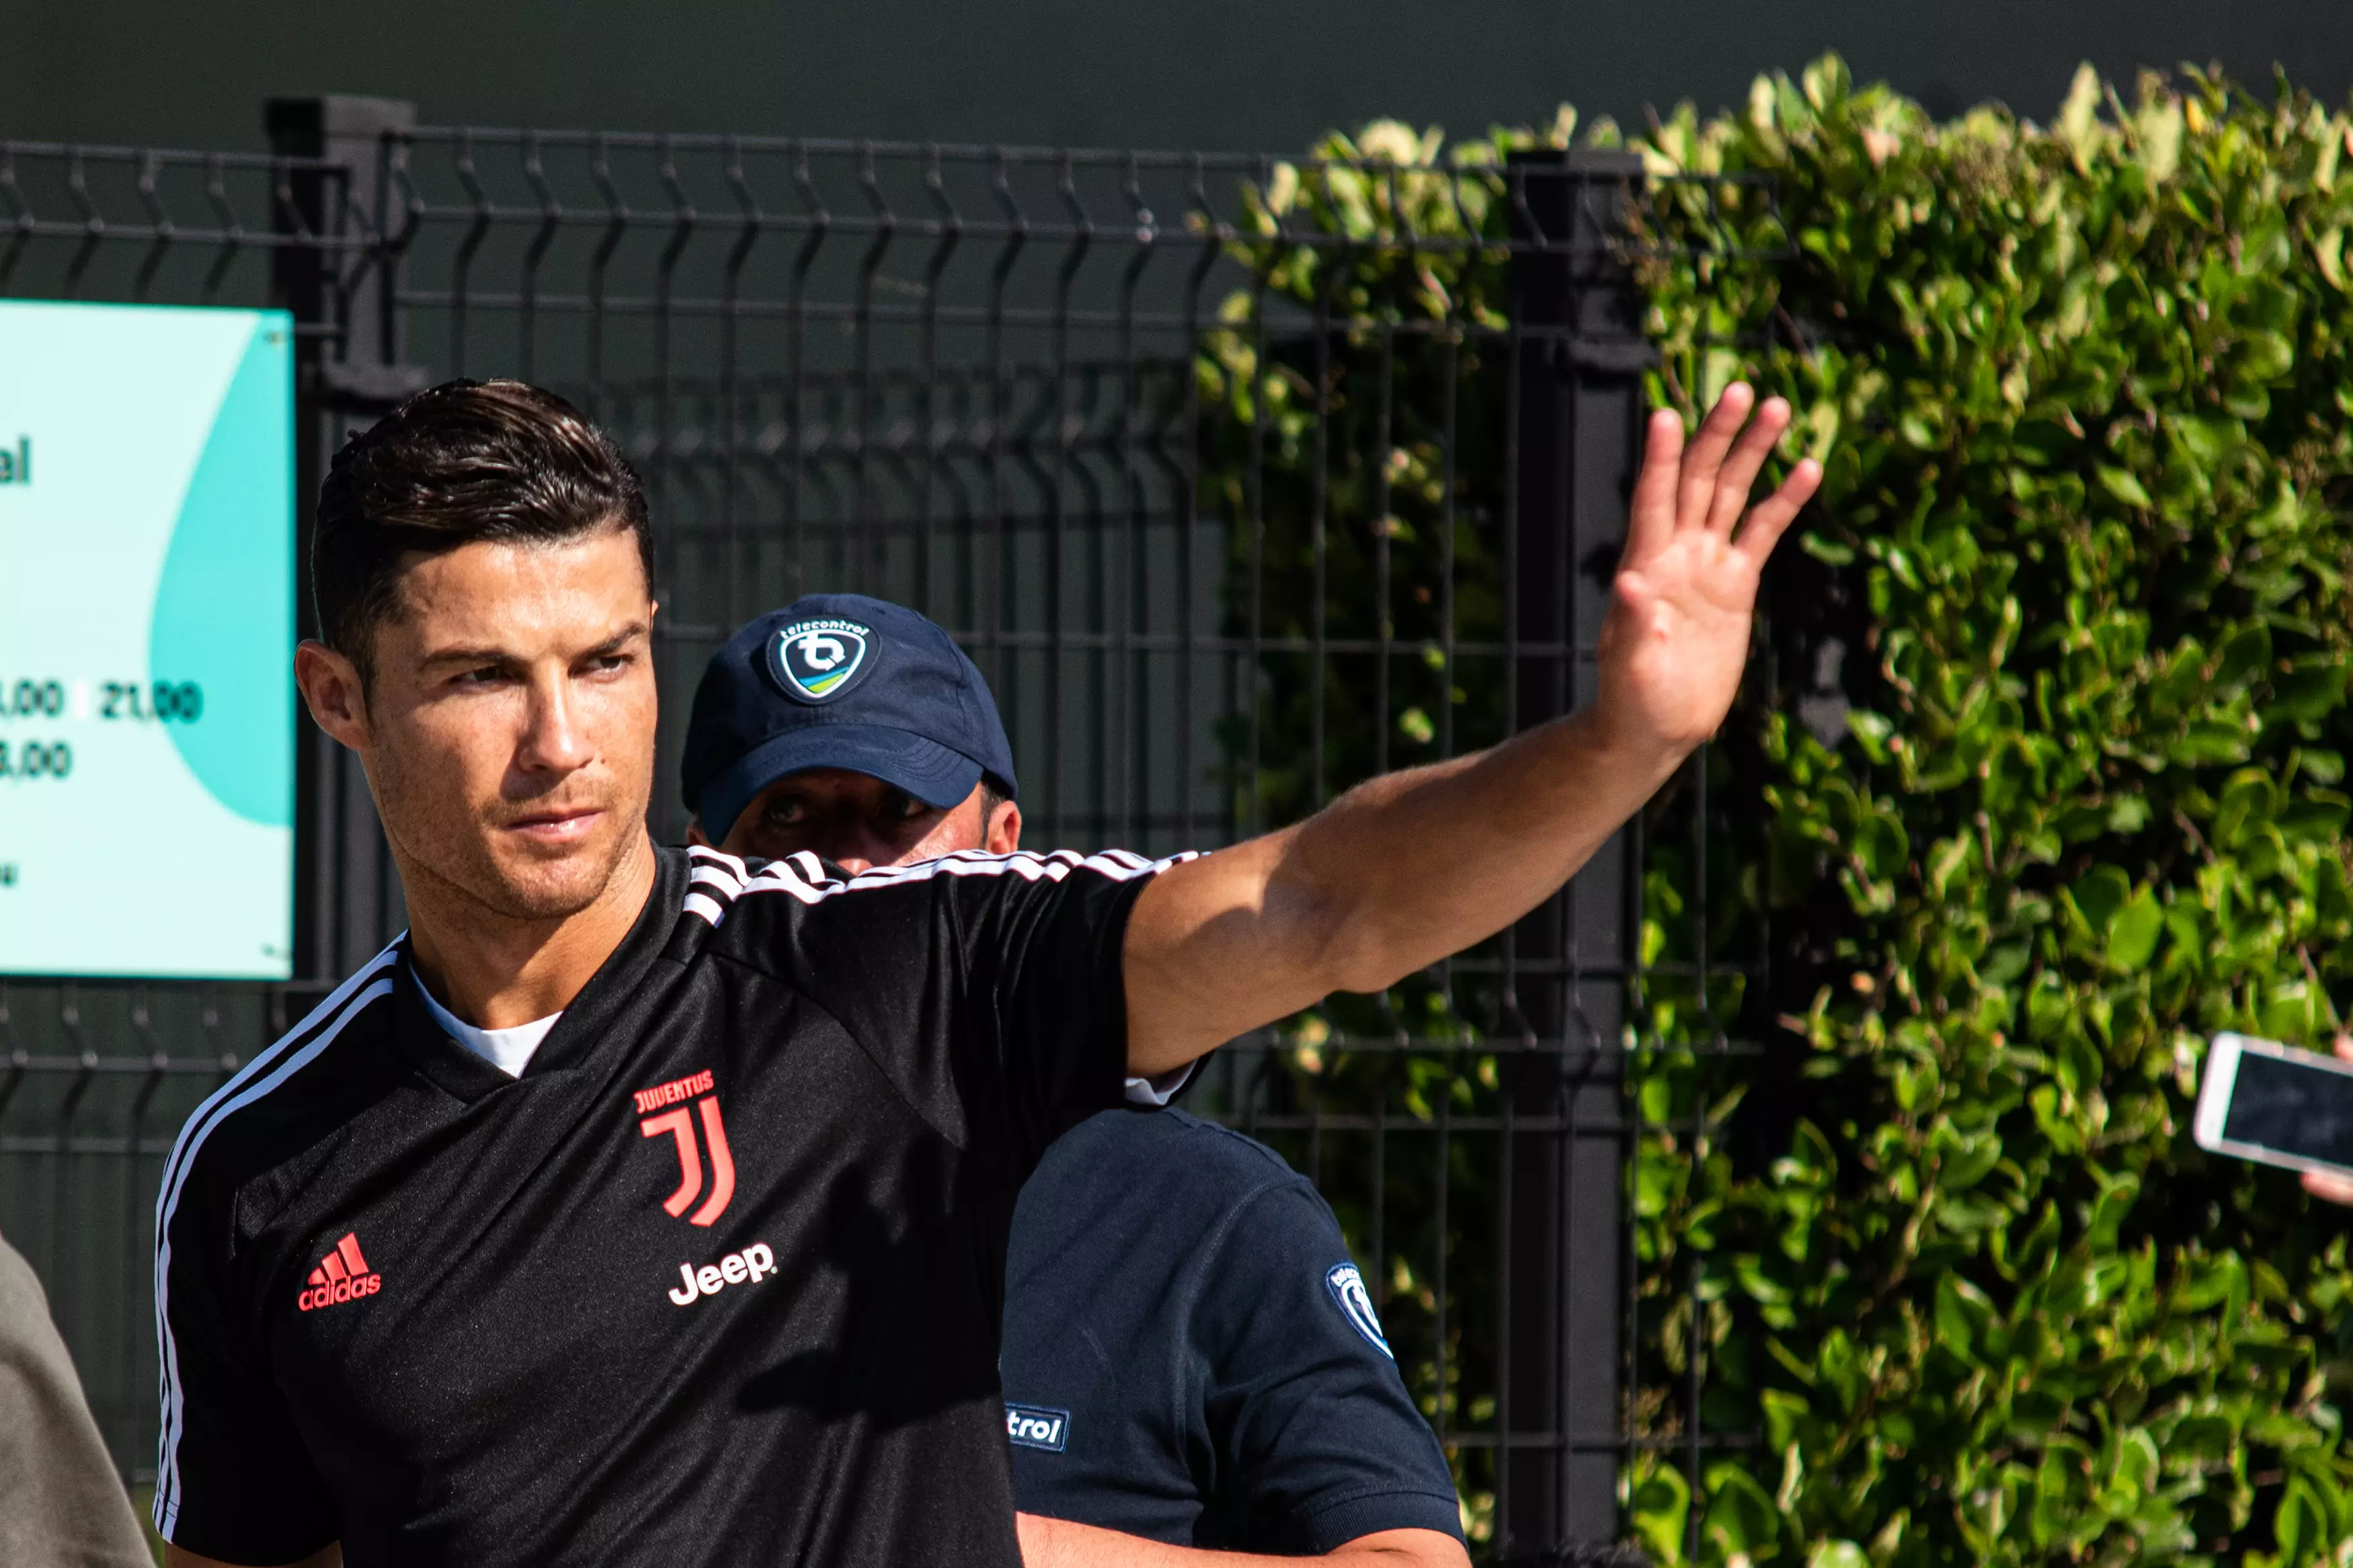 Ronaldo waves at the crowds ahead of pre season training. Image: PA Images